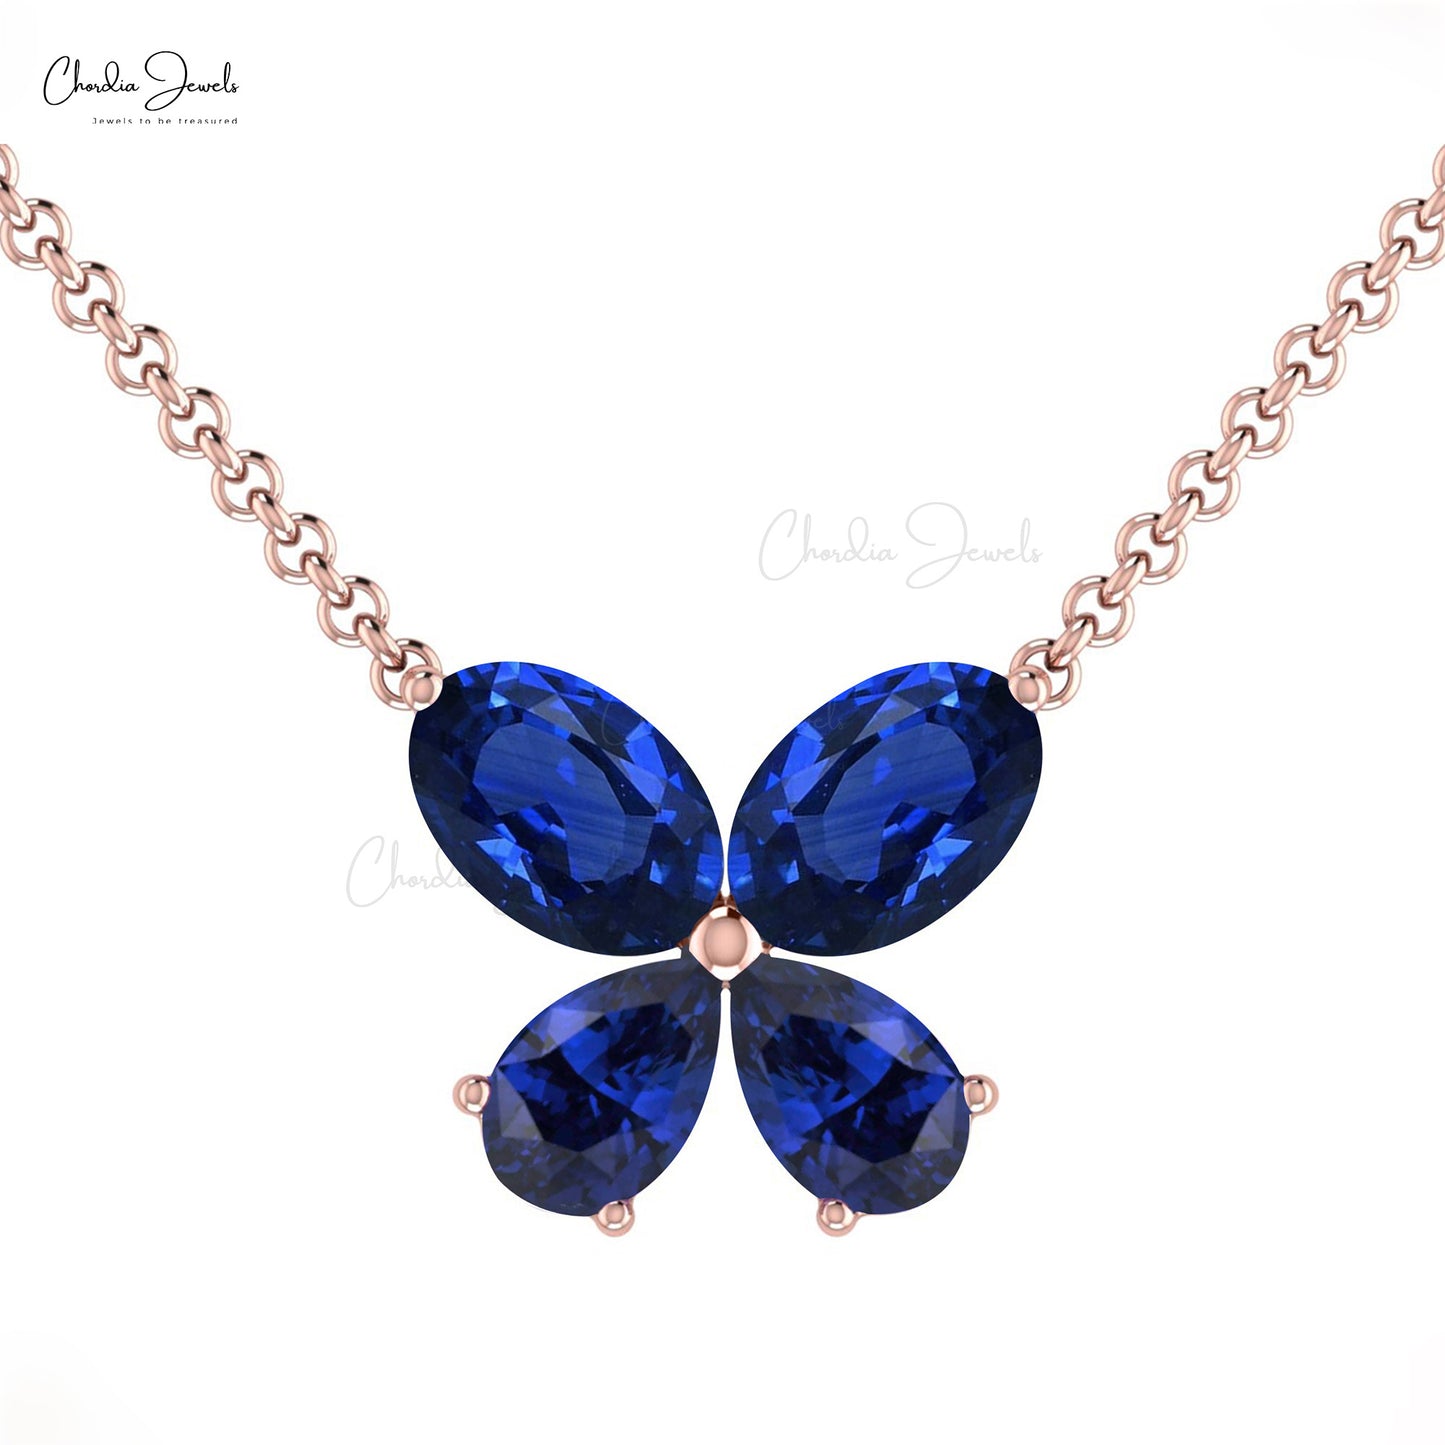 Classical Design Butterfly Blue Sapphire Charms Necklace Pendant Oval Shape Natural Gemstone Necklace in Pure 14k Gold Bridesmaid Gift